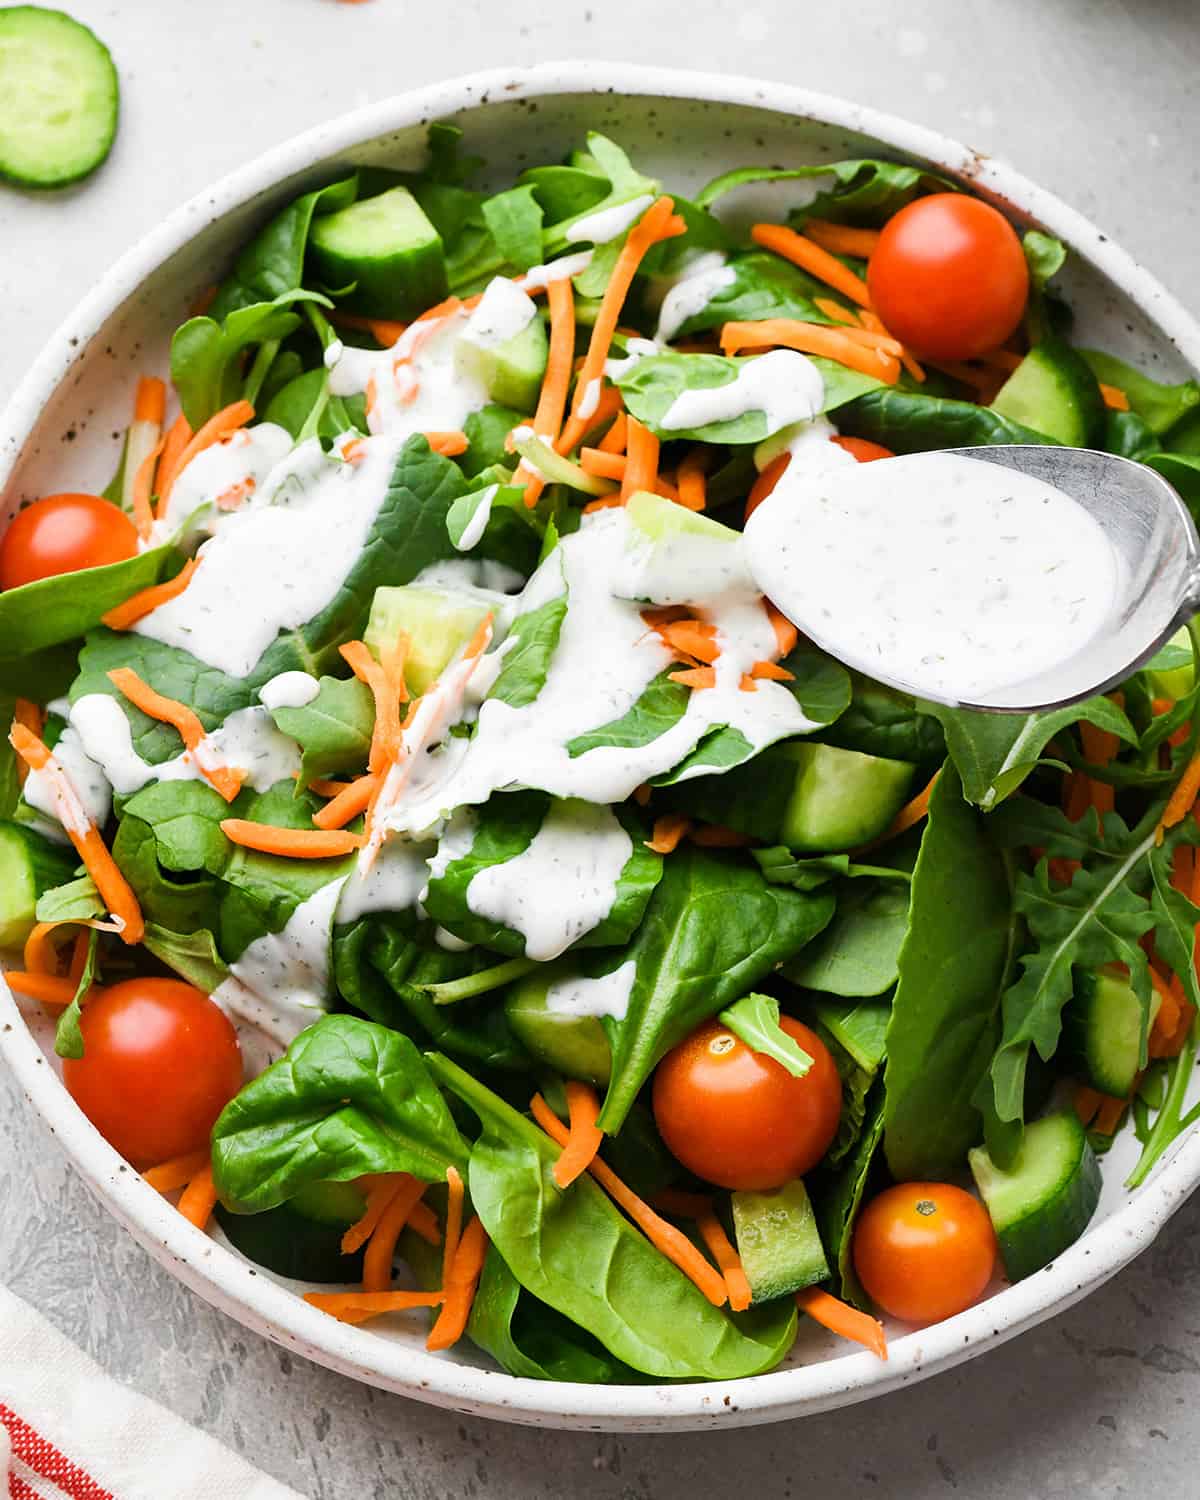 ranch dressing being drizzled on top of a salad